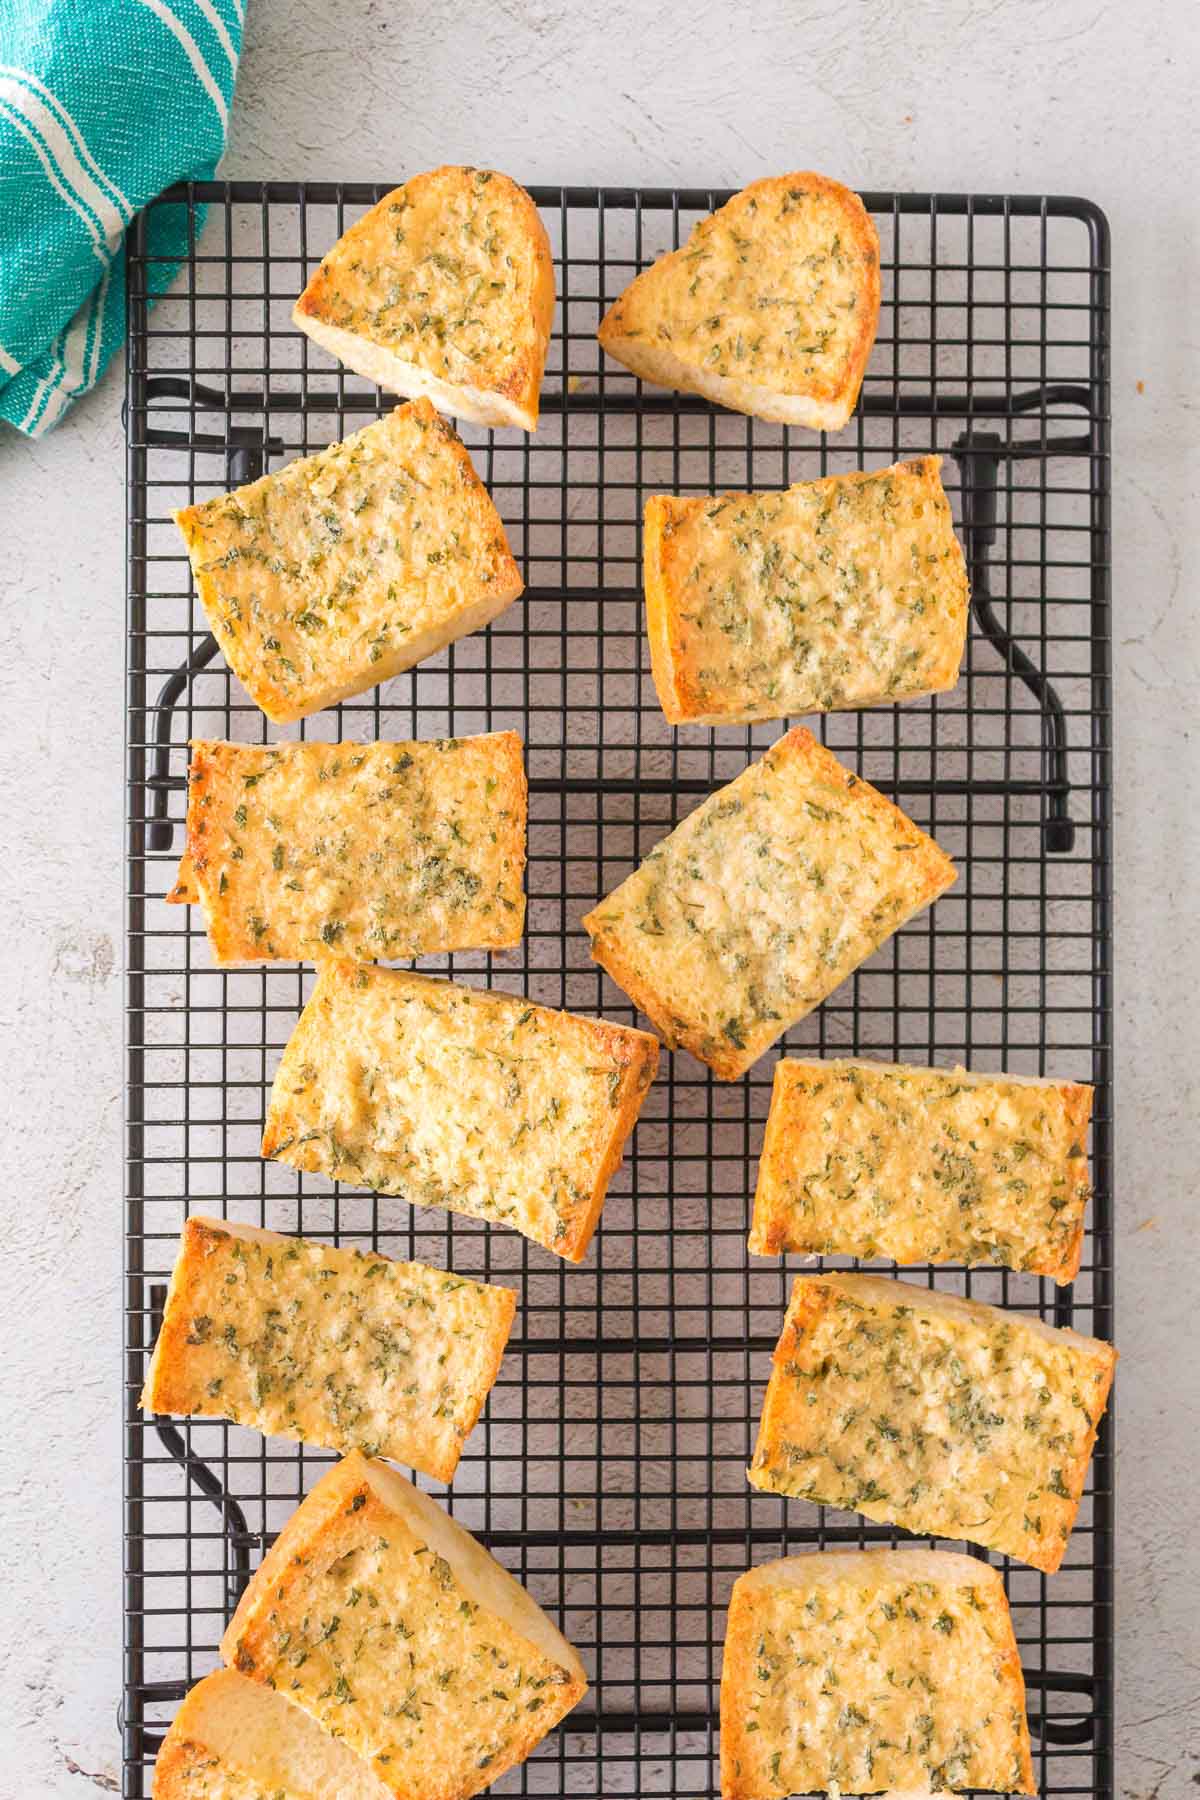 baked garlic bread pieces on a cooling rack.